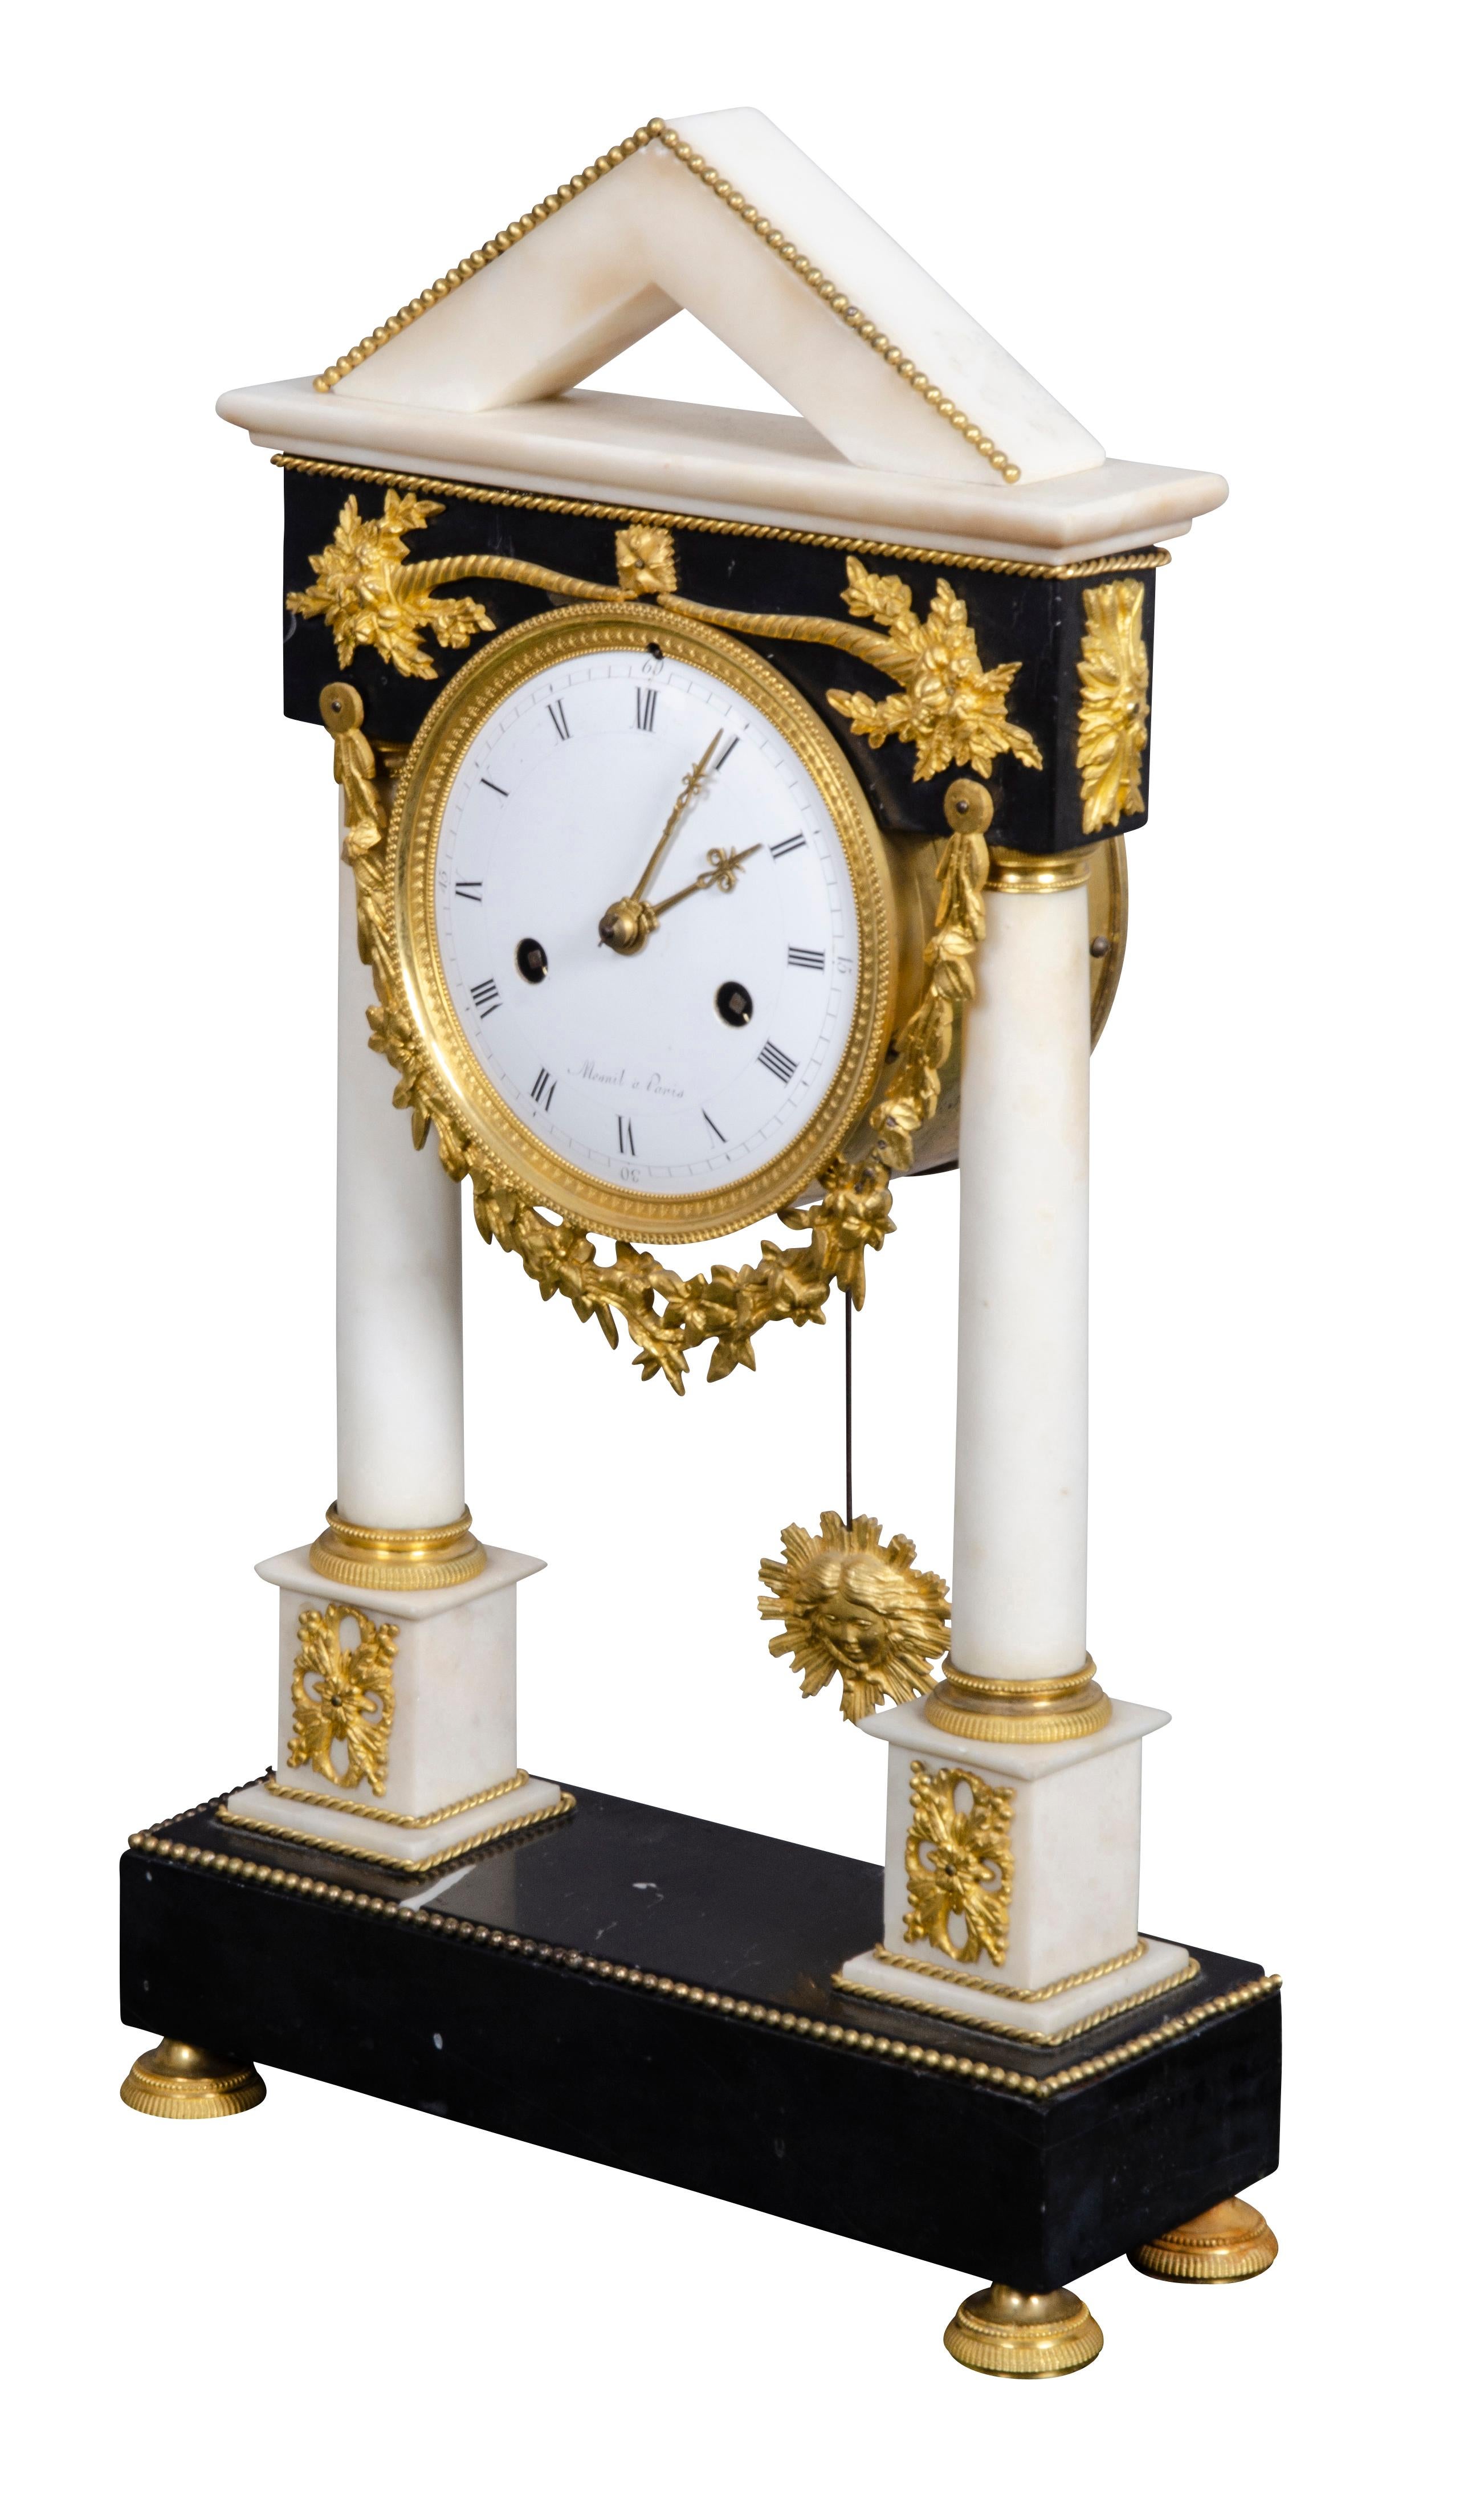 French Restauration Gilt Bronze Clock Signed Mesnil, Paris In Good Condition For Sale In Essex, MA